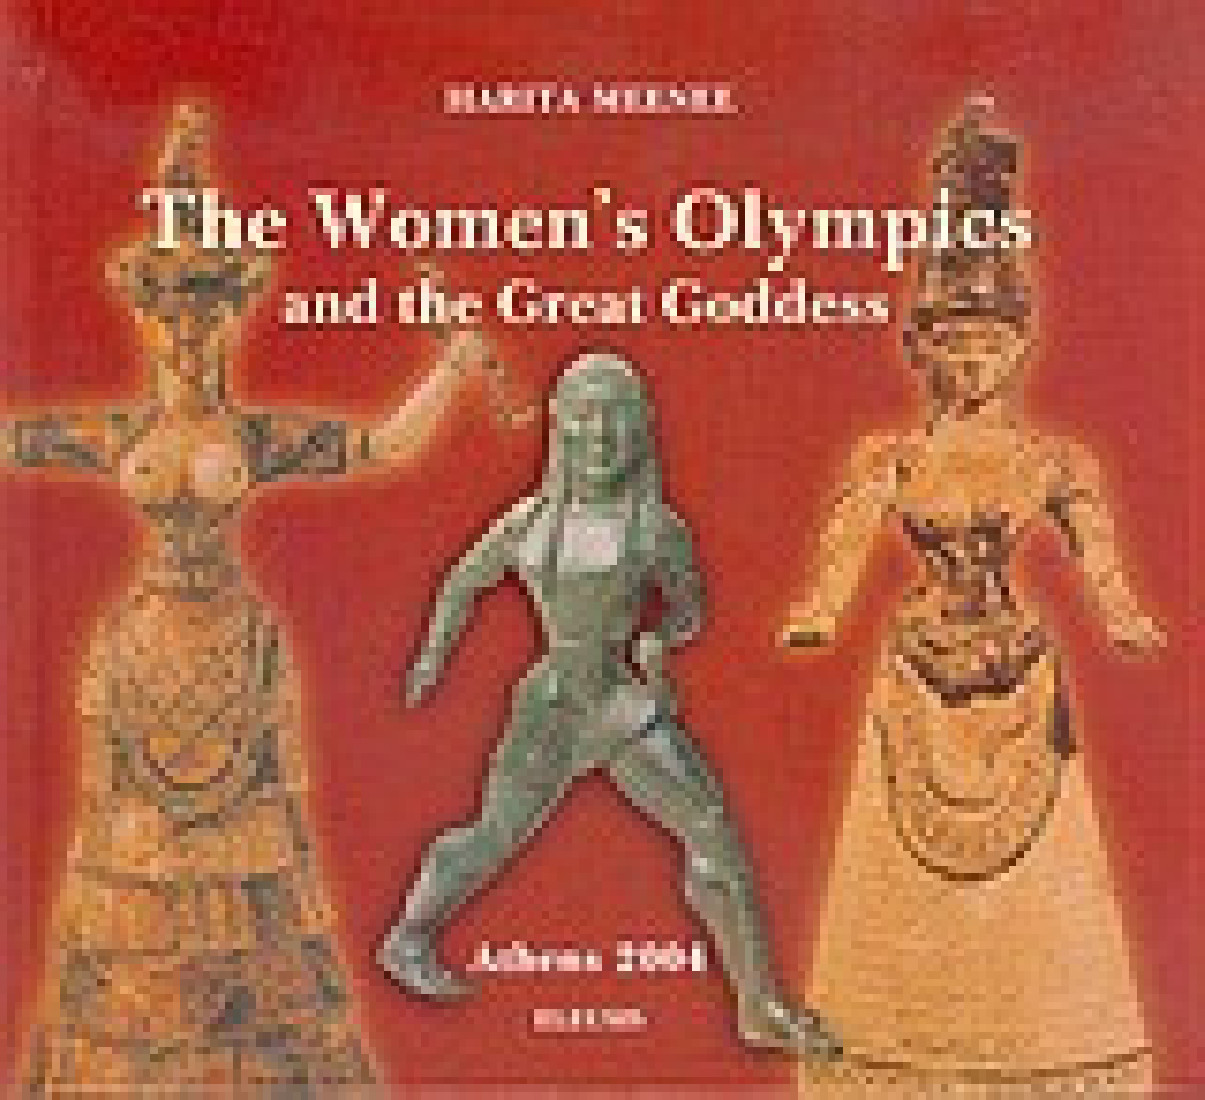 The Womens Olympics and the Great Goddess